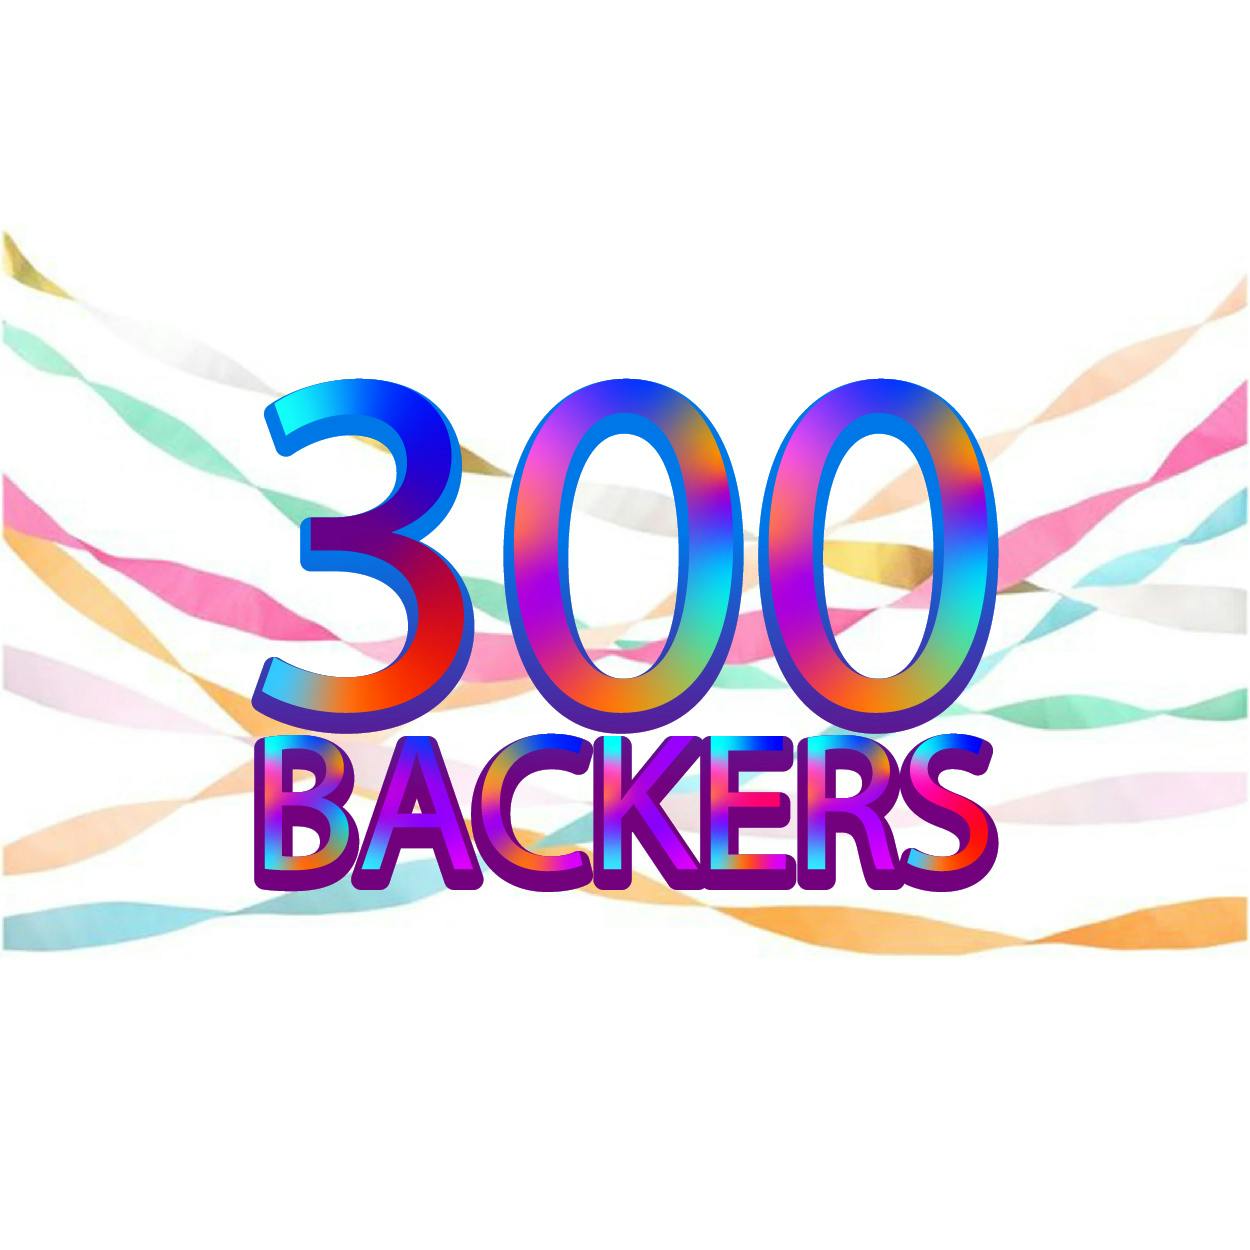 We Reached 300 Backers!